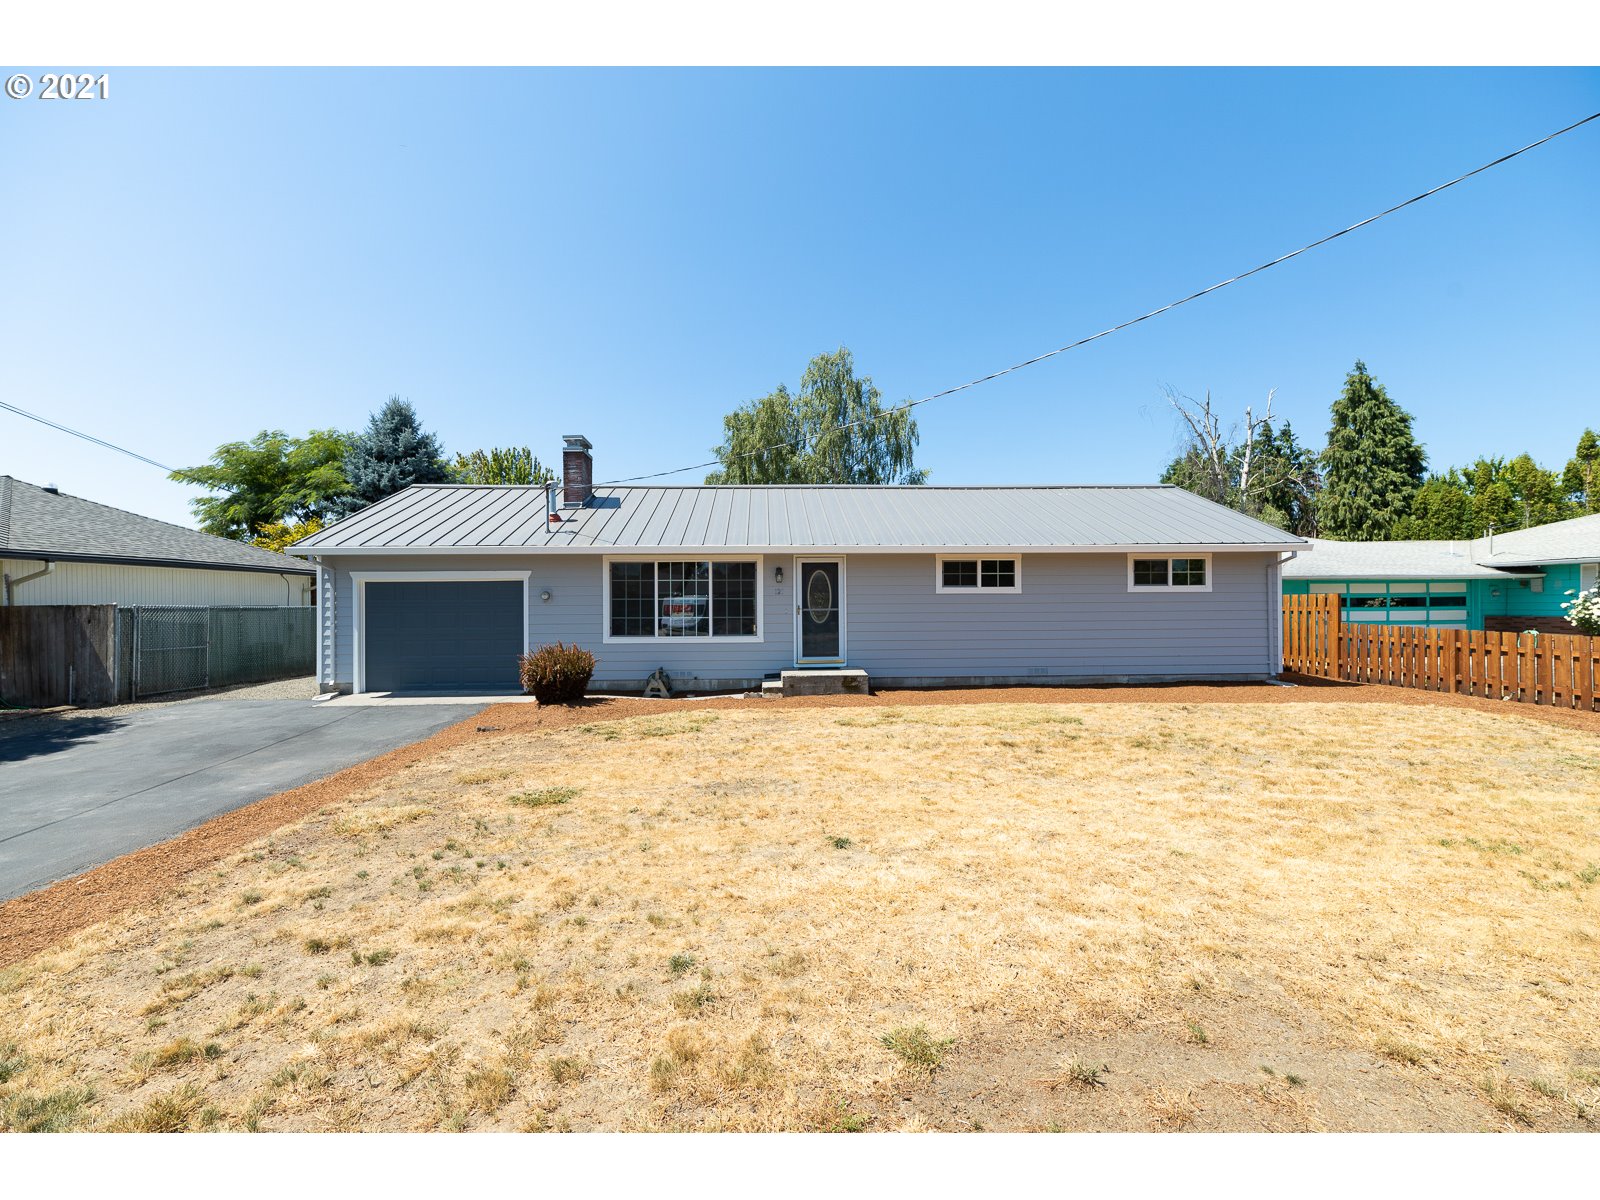 125 S 26TH AVE (1 of 21)